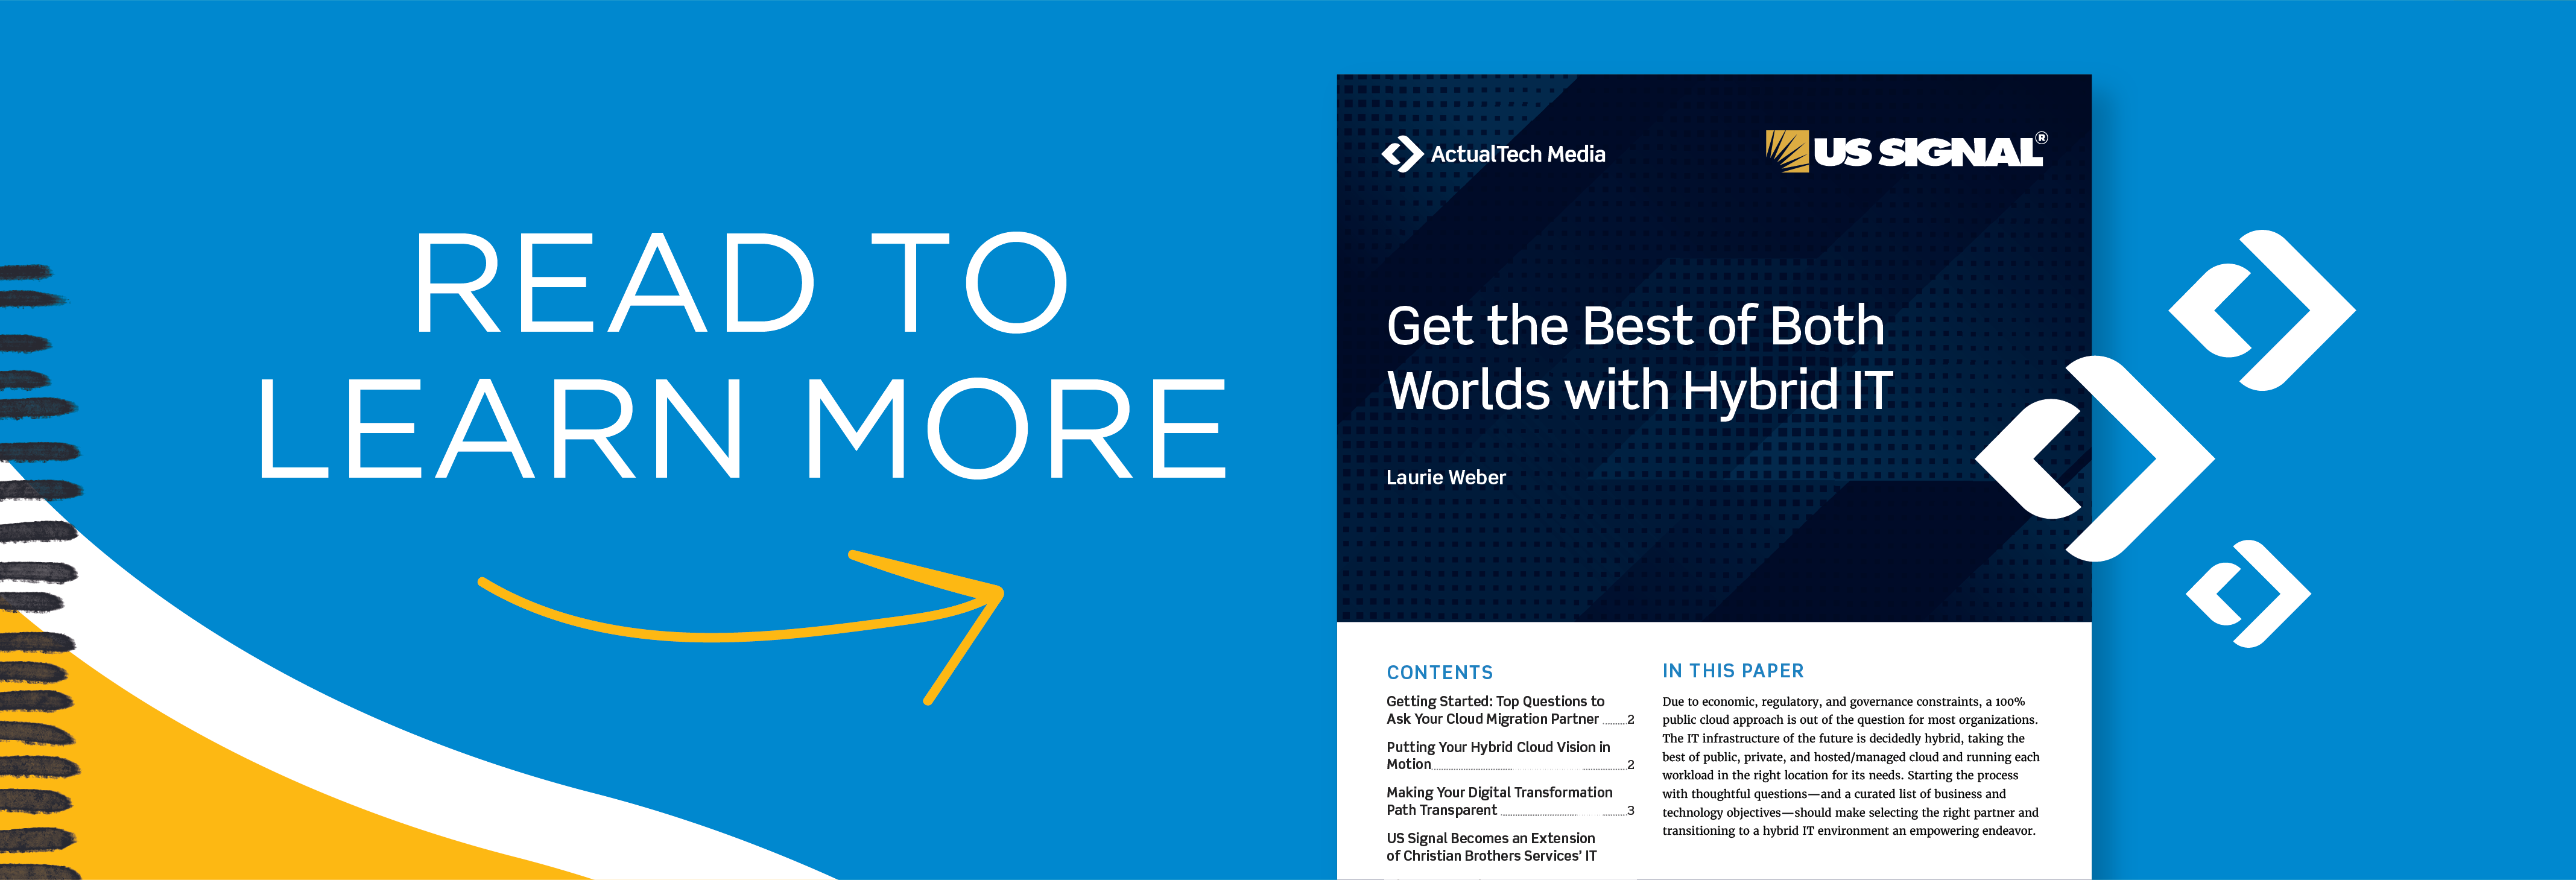 Click to Read Best of Both Worlds with Hybrid IT with ActualTech Media